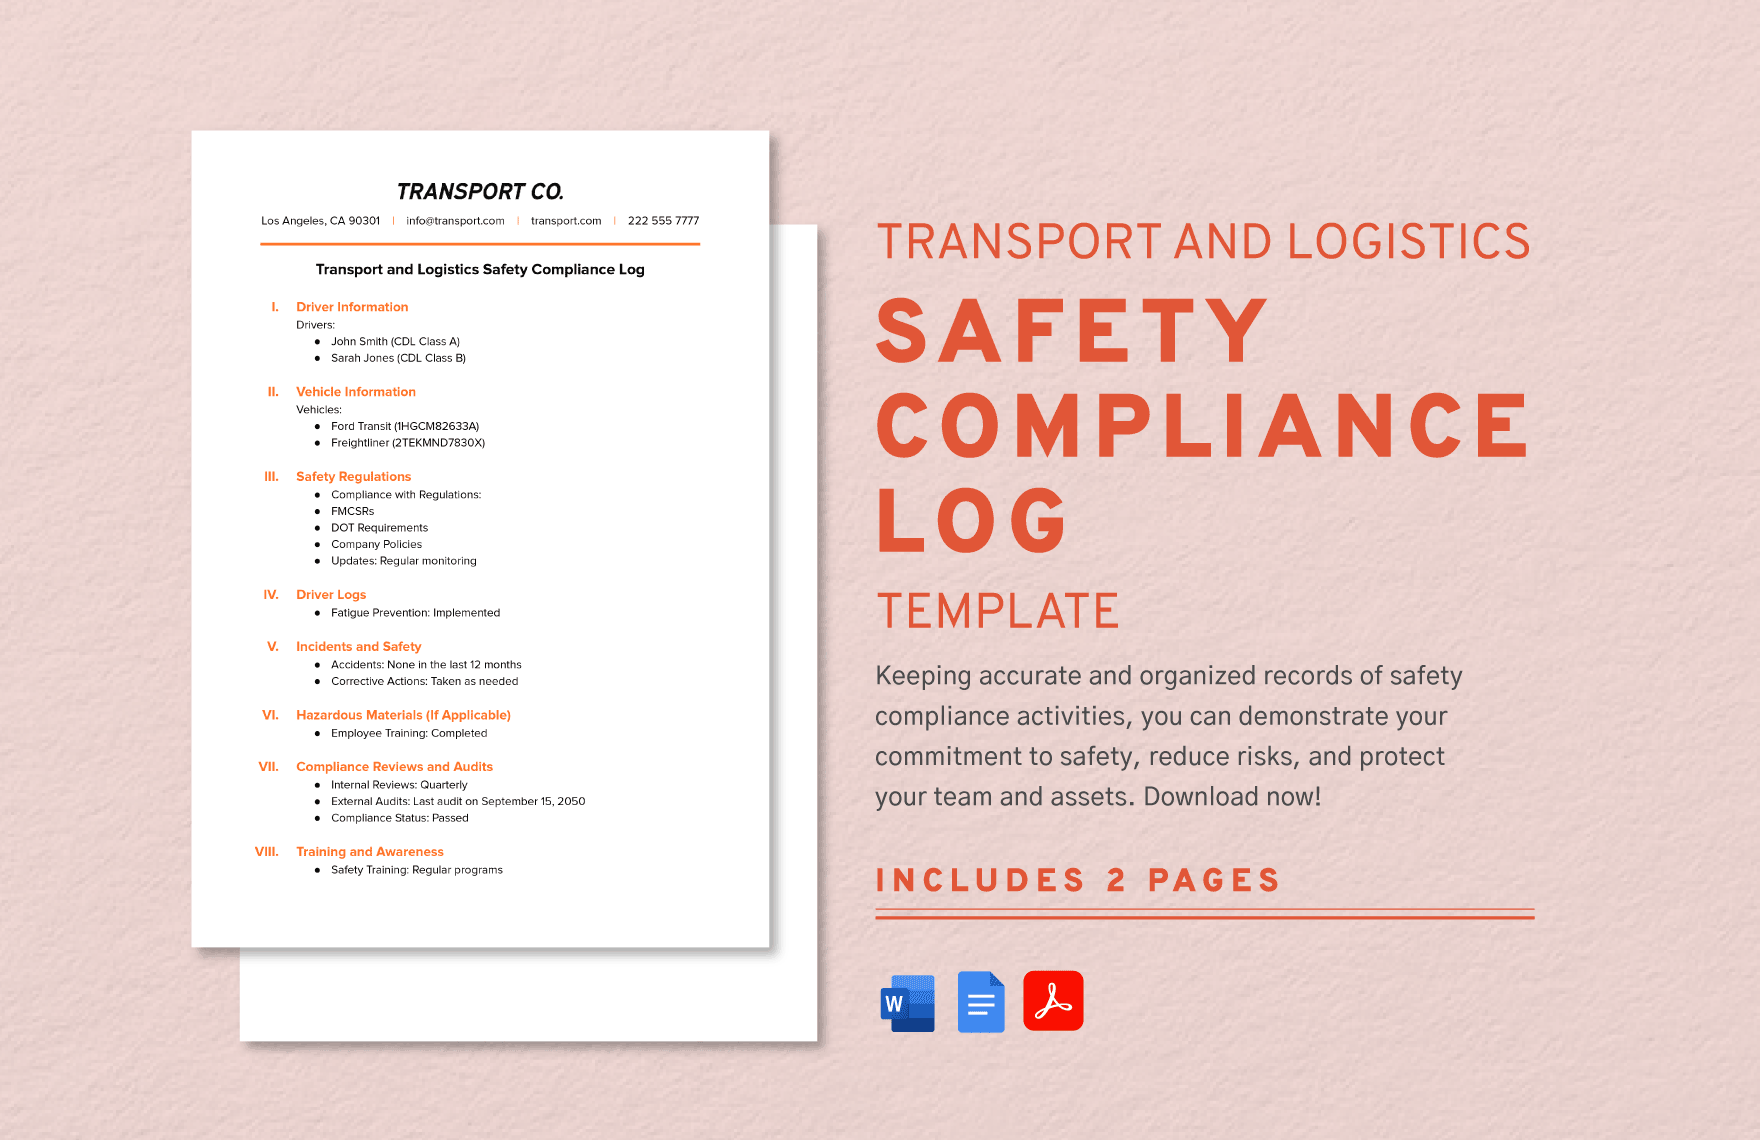 Transport and Logistics Safety Compliance Log Template